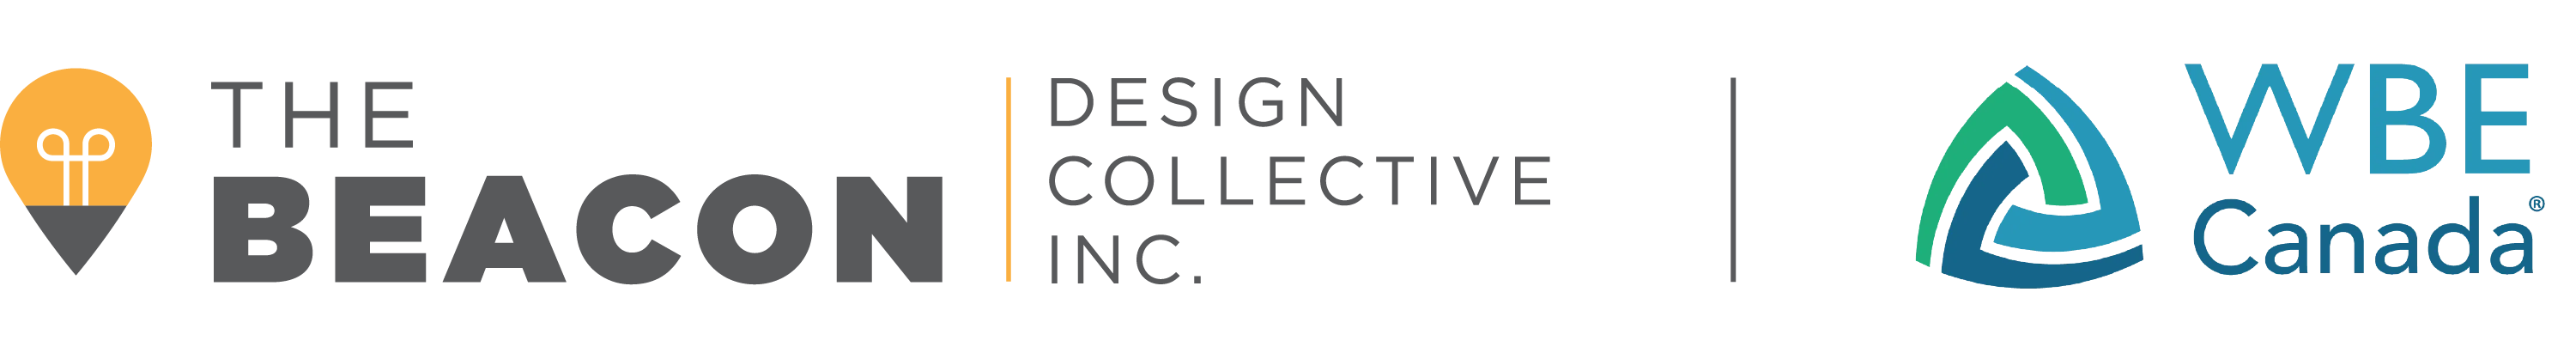 The logos of The Beacon Design Collective and WBE Canada displayed side by side.